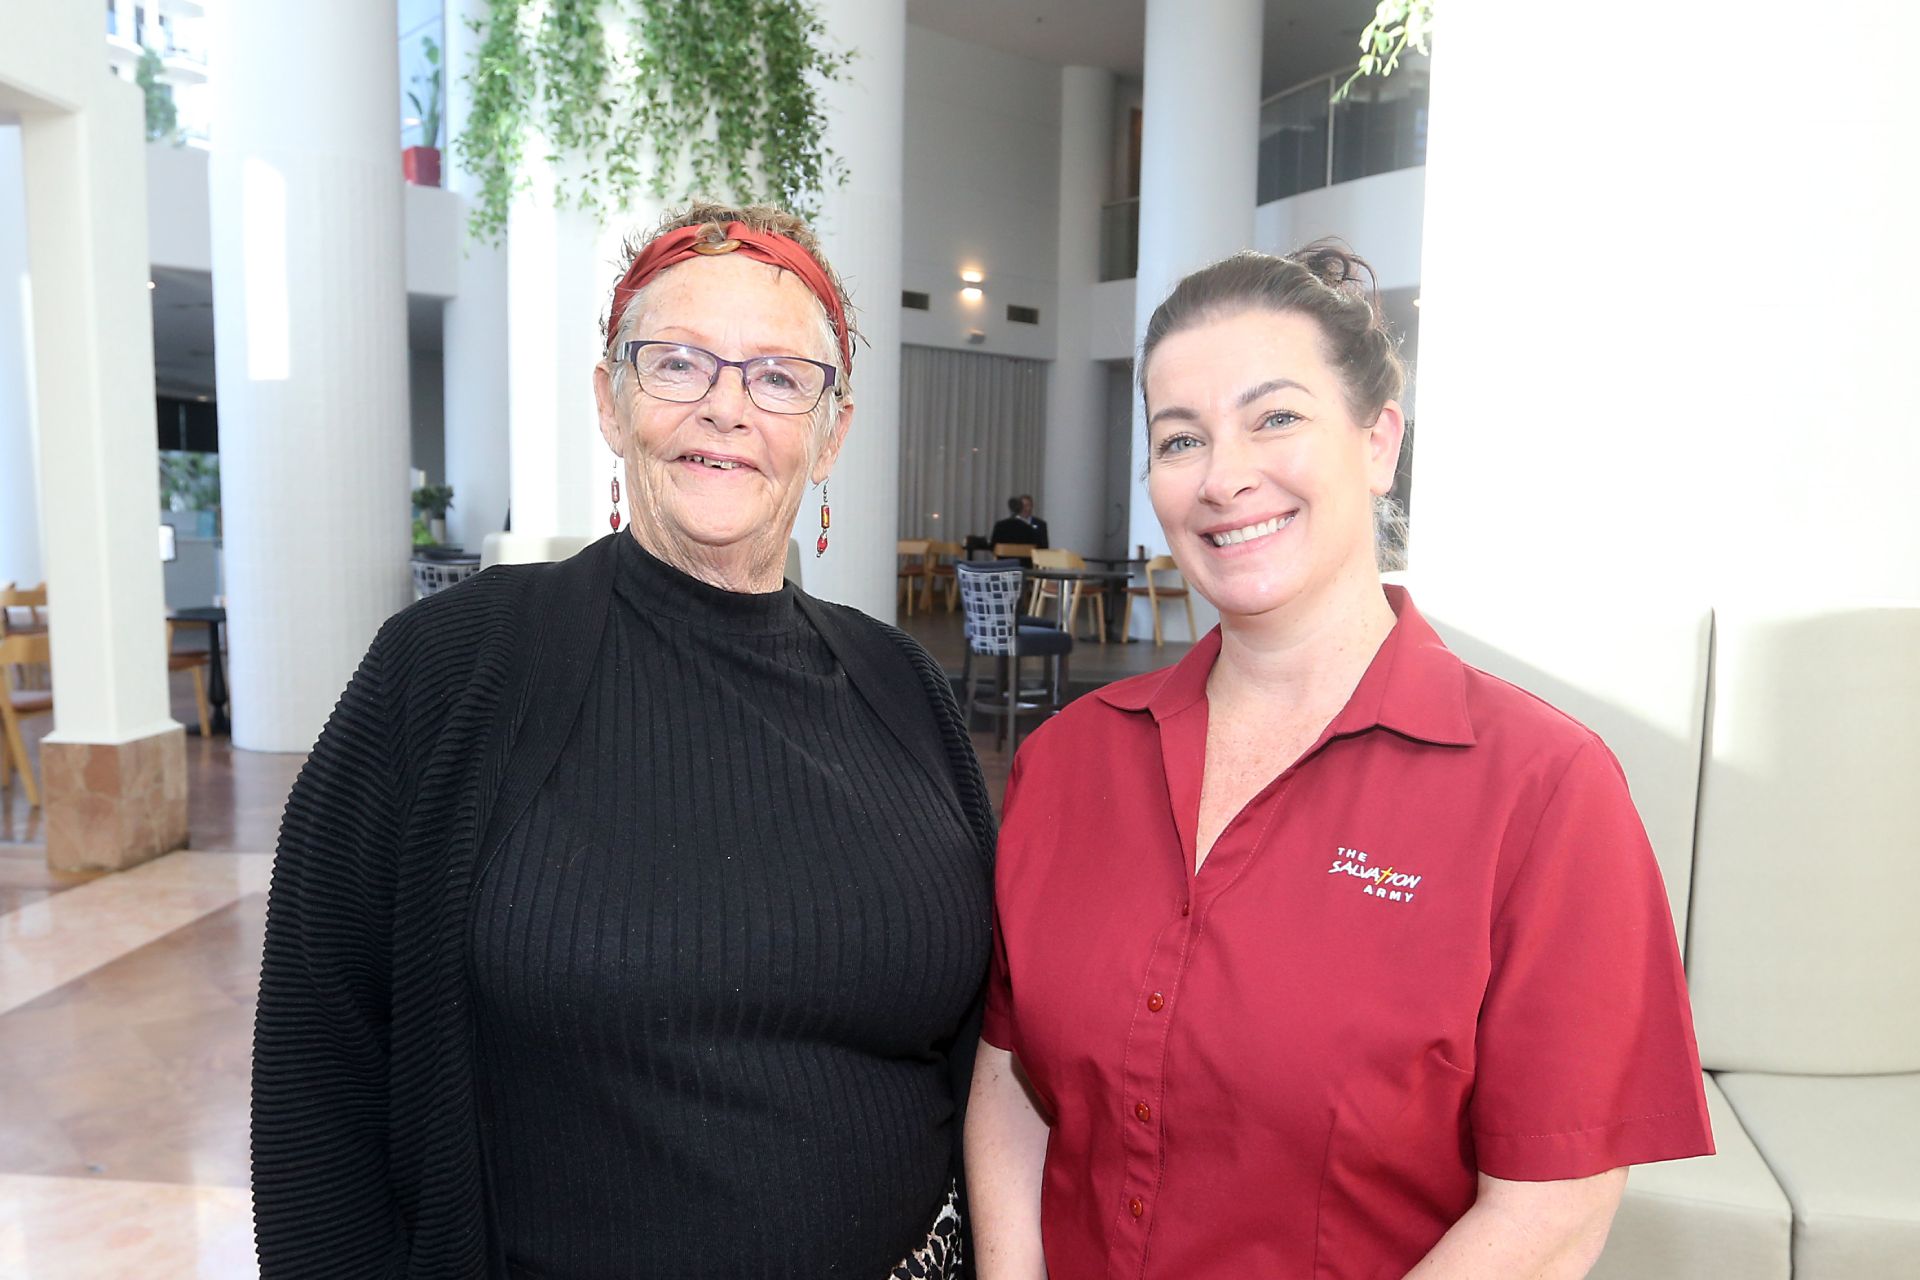 Kerry found shelter, advocacy and homelessness support through The Salvation Army, picture of Kerrie with The Salvos. Credit: Gold Coast Bulletin - Ryan Gosling